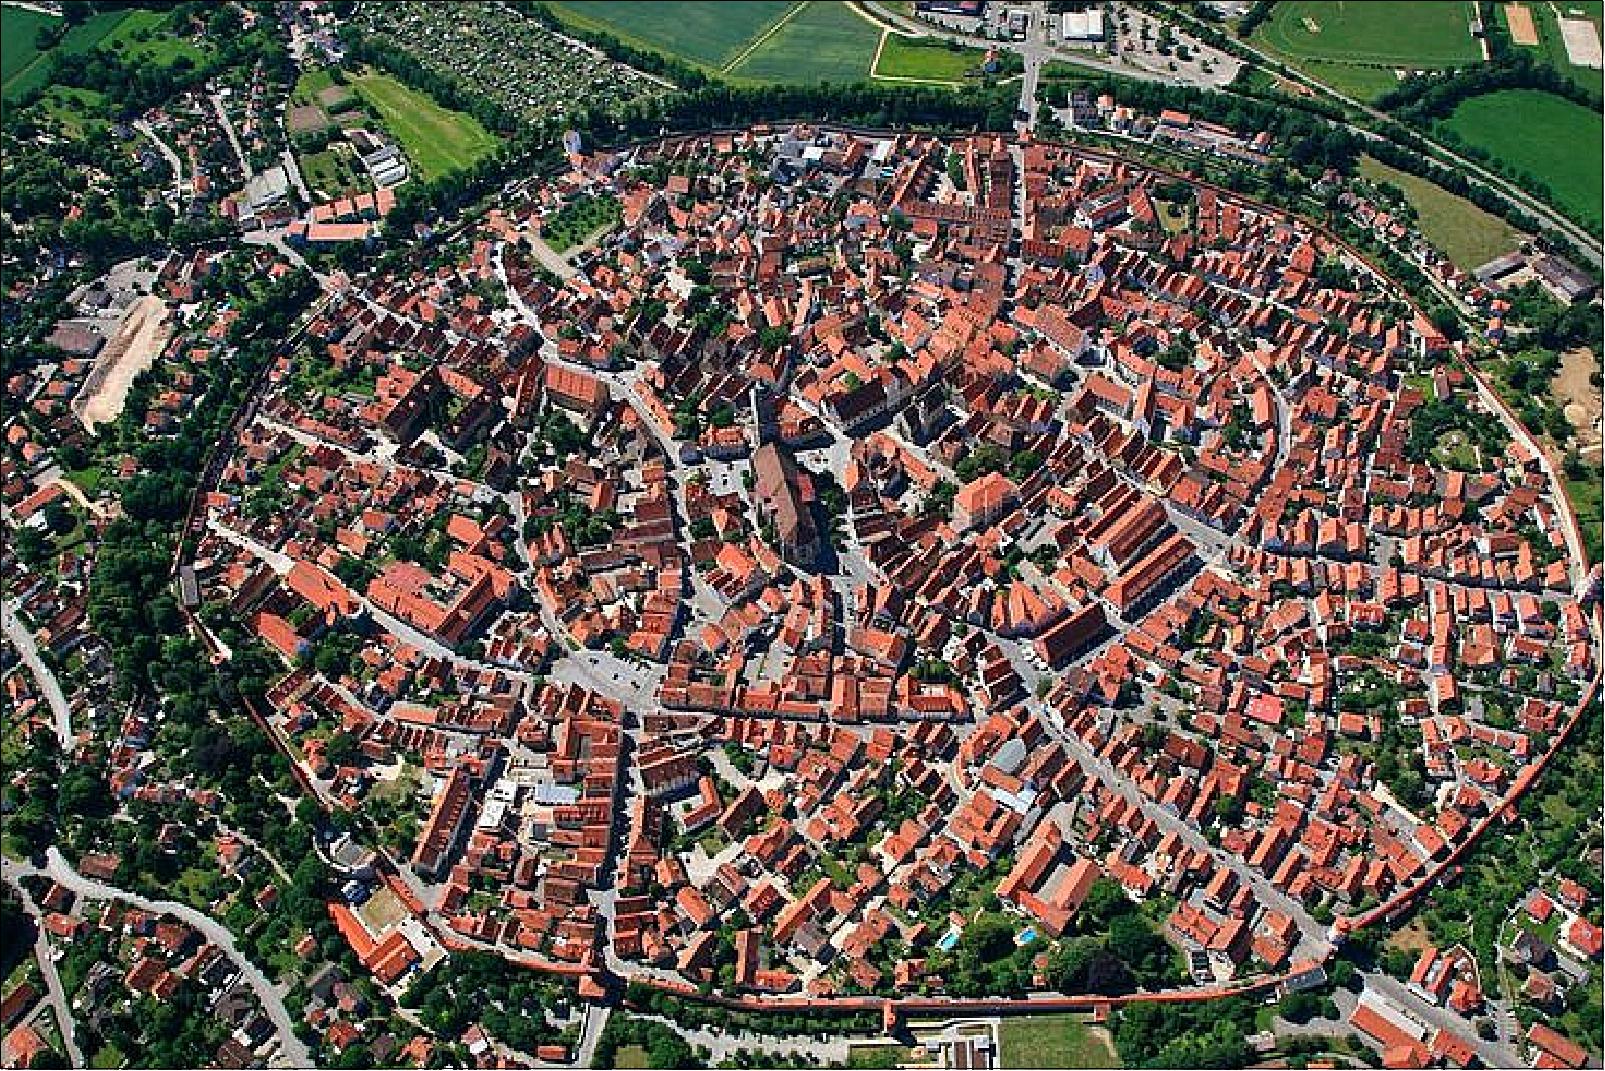 Figure 34: An aerial view of the town of Nördlingen inside the meteorite Ries crater